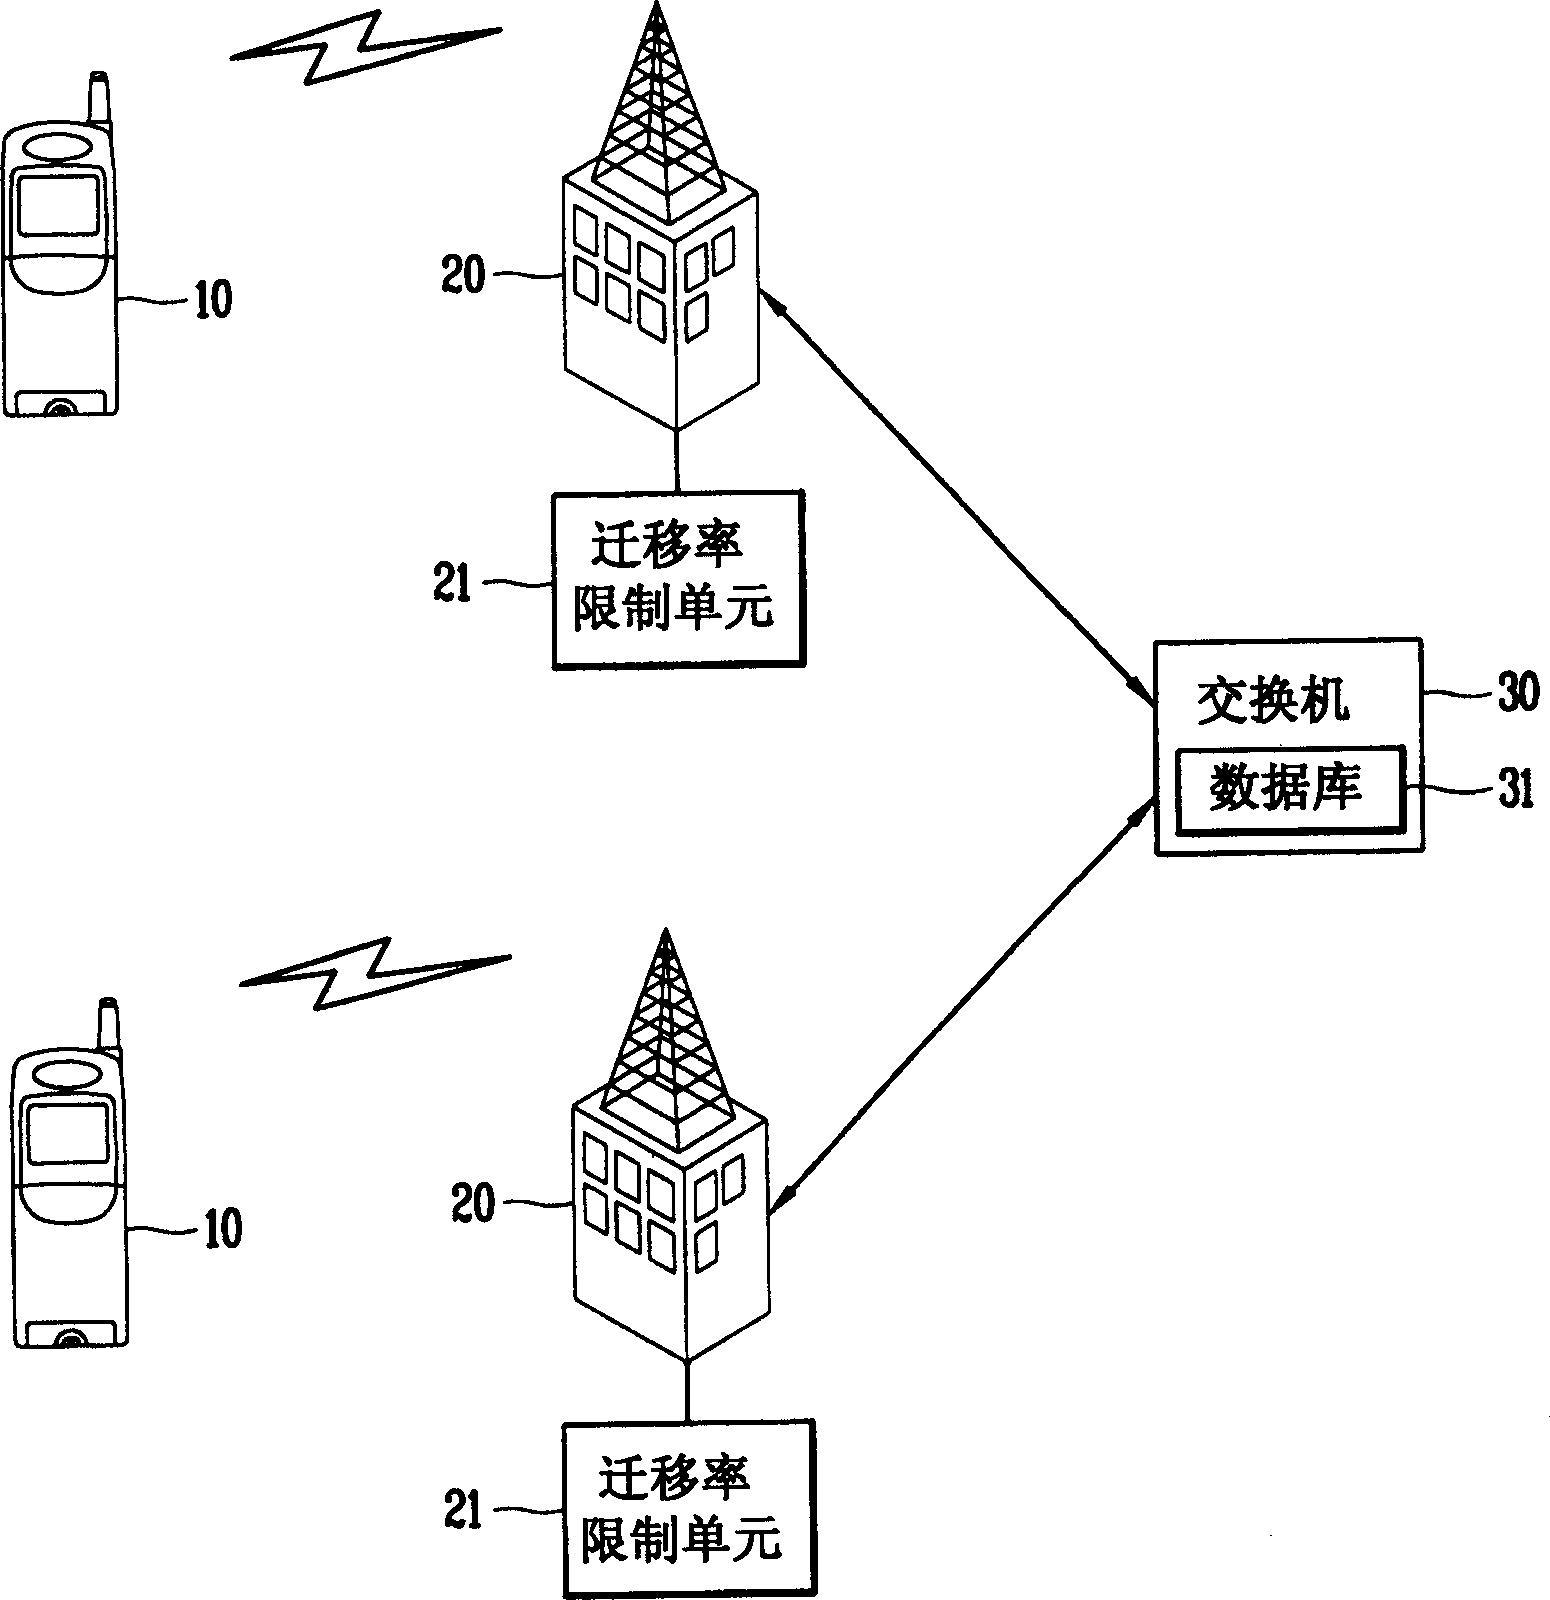 Automatic re-origination method for multimedia or voice call in mobile station